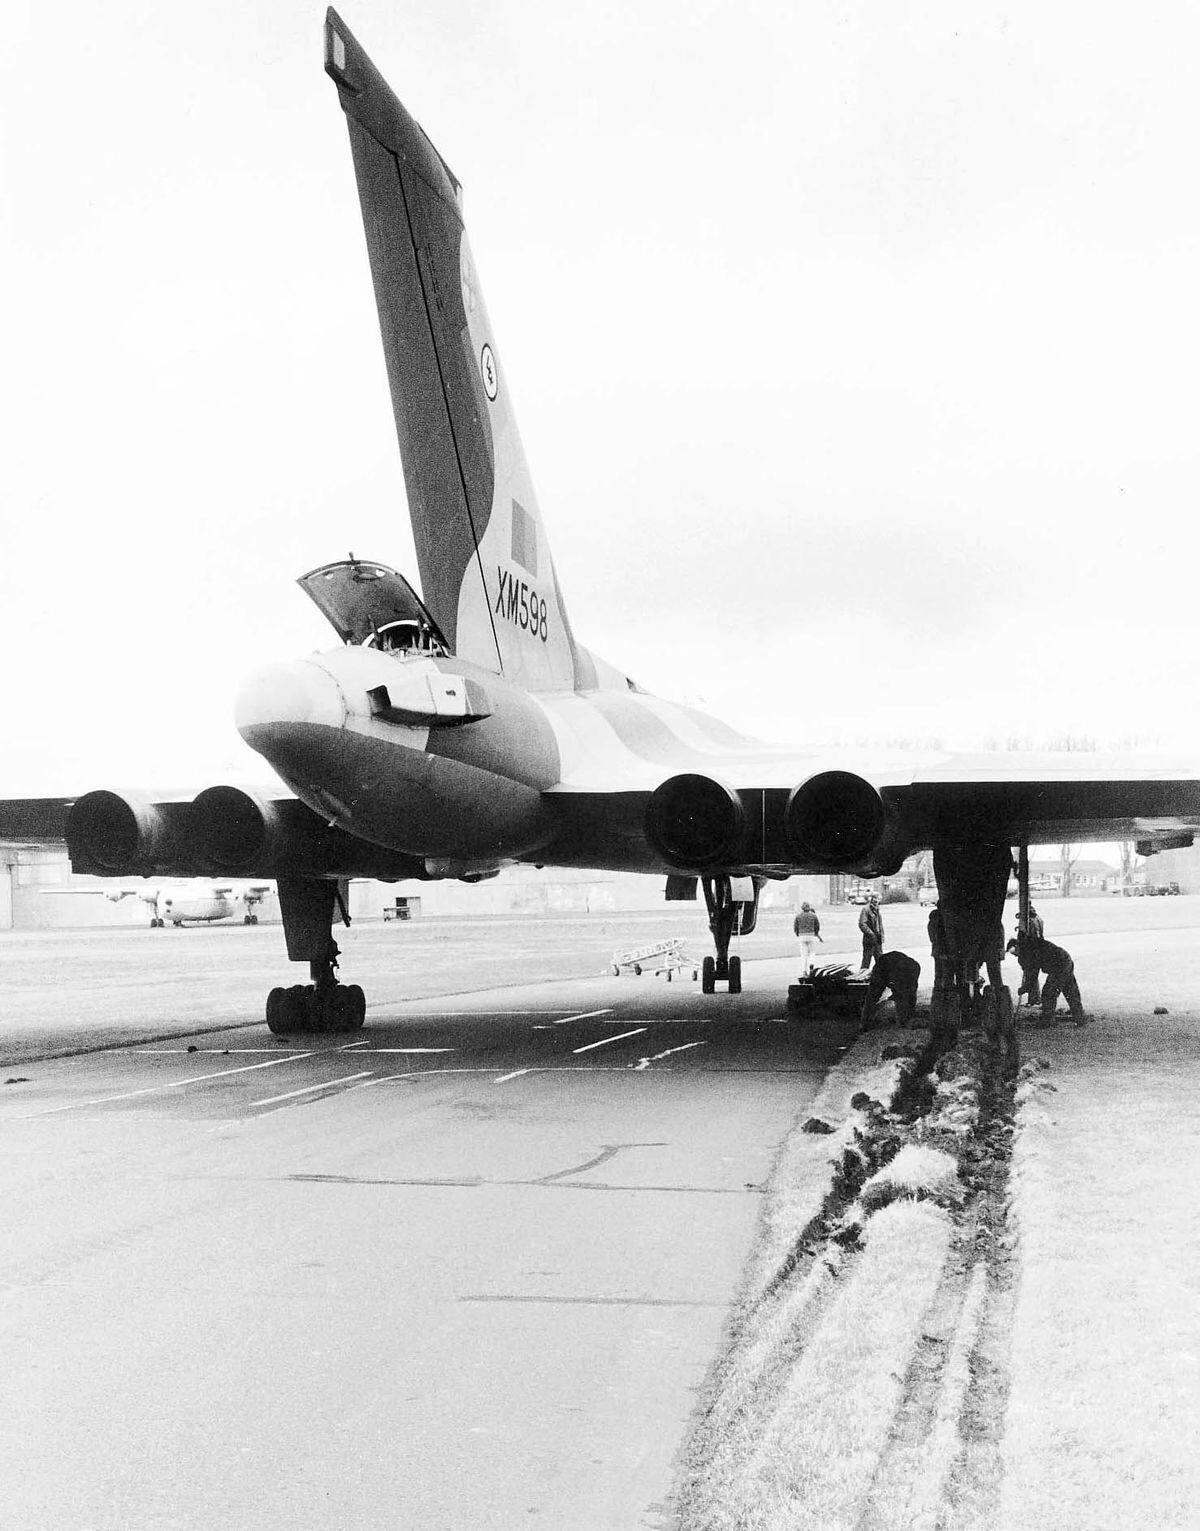 Stuck on you... This Vulcan bomber got bogged down after landing at RAF Cosford in January 1983